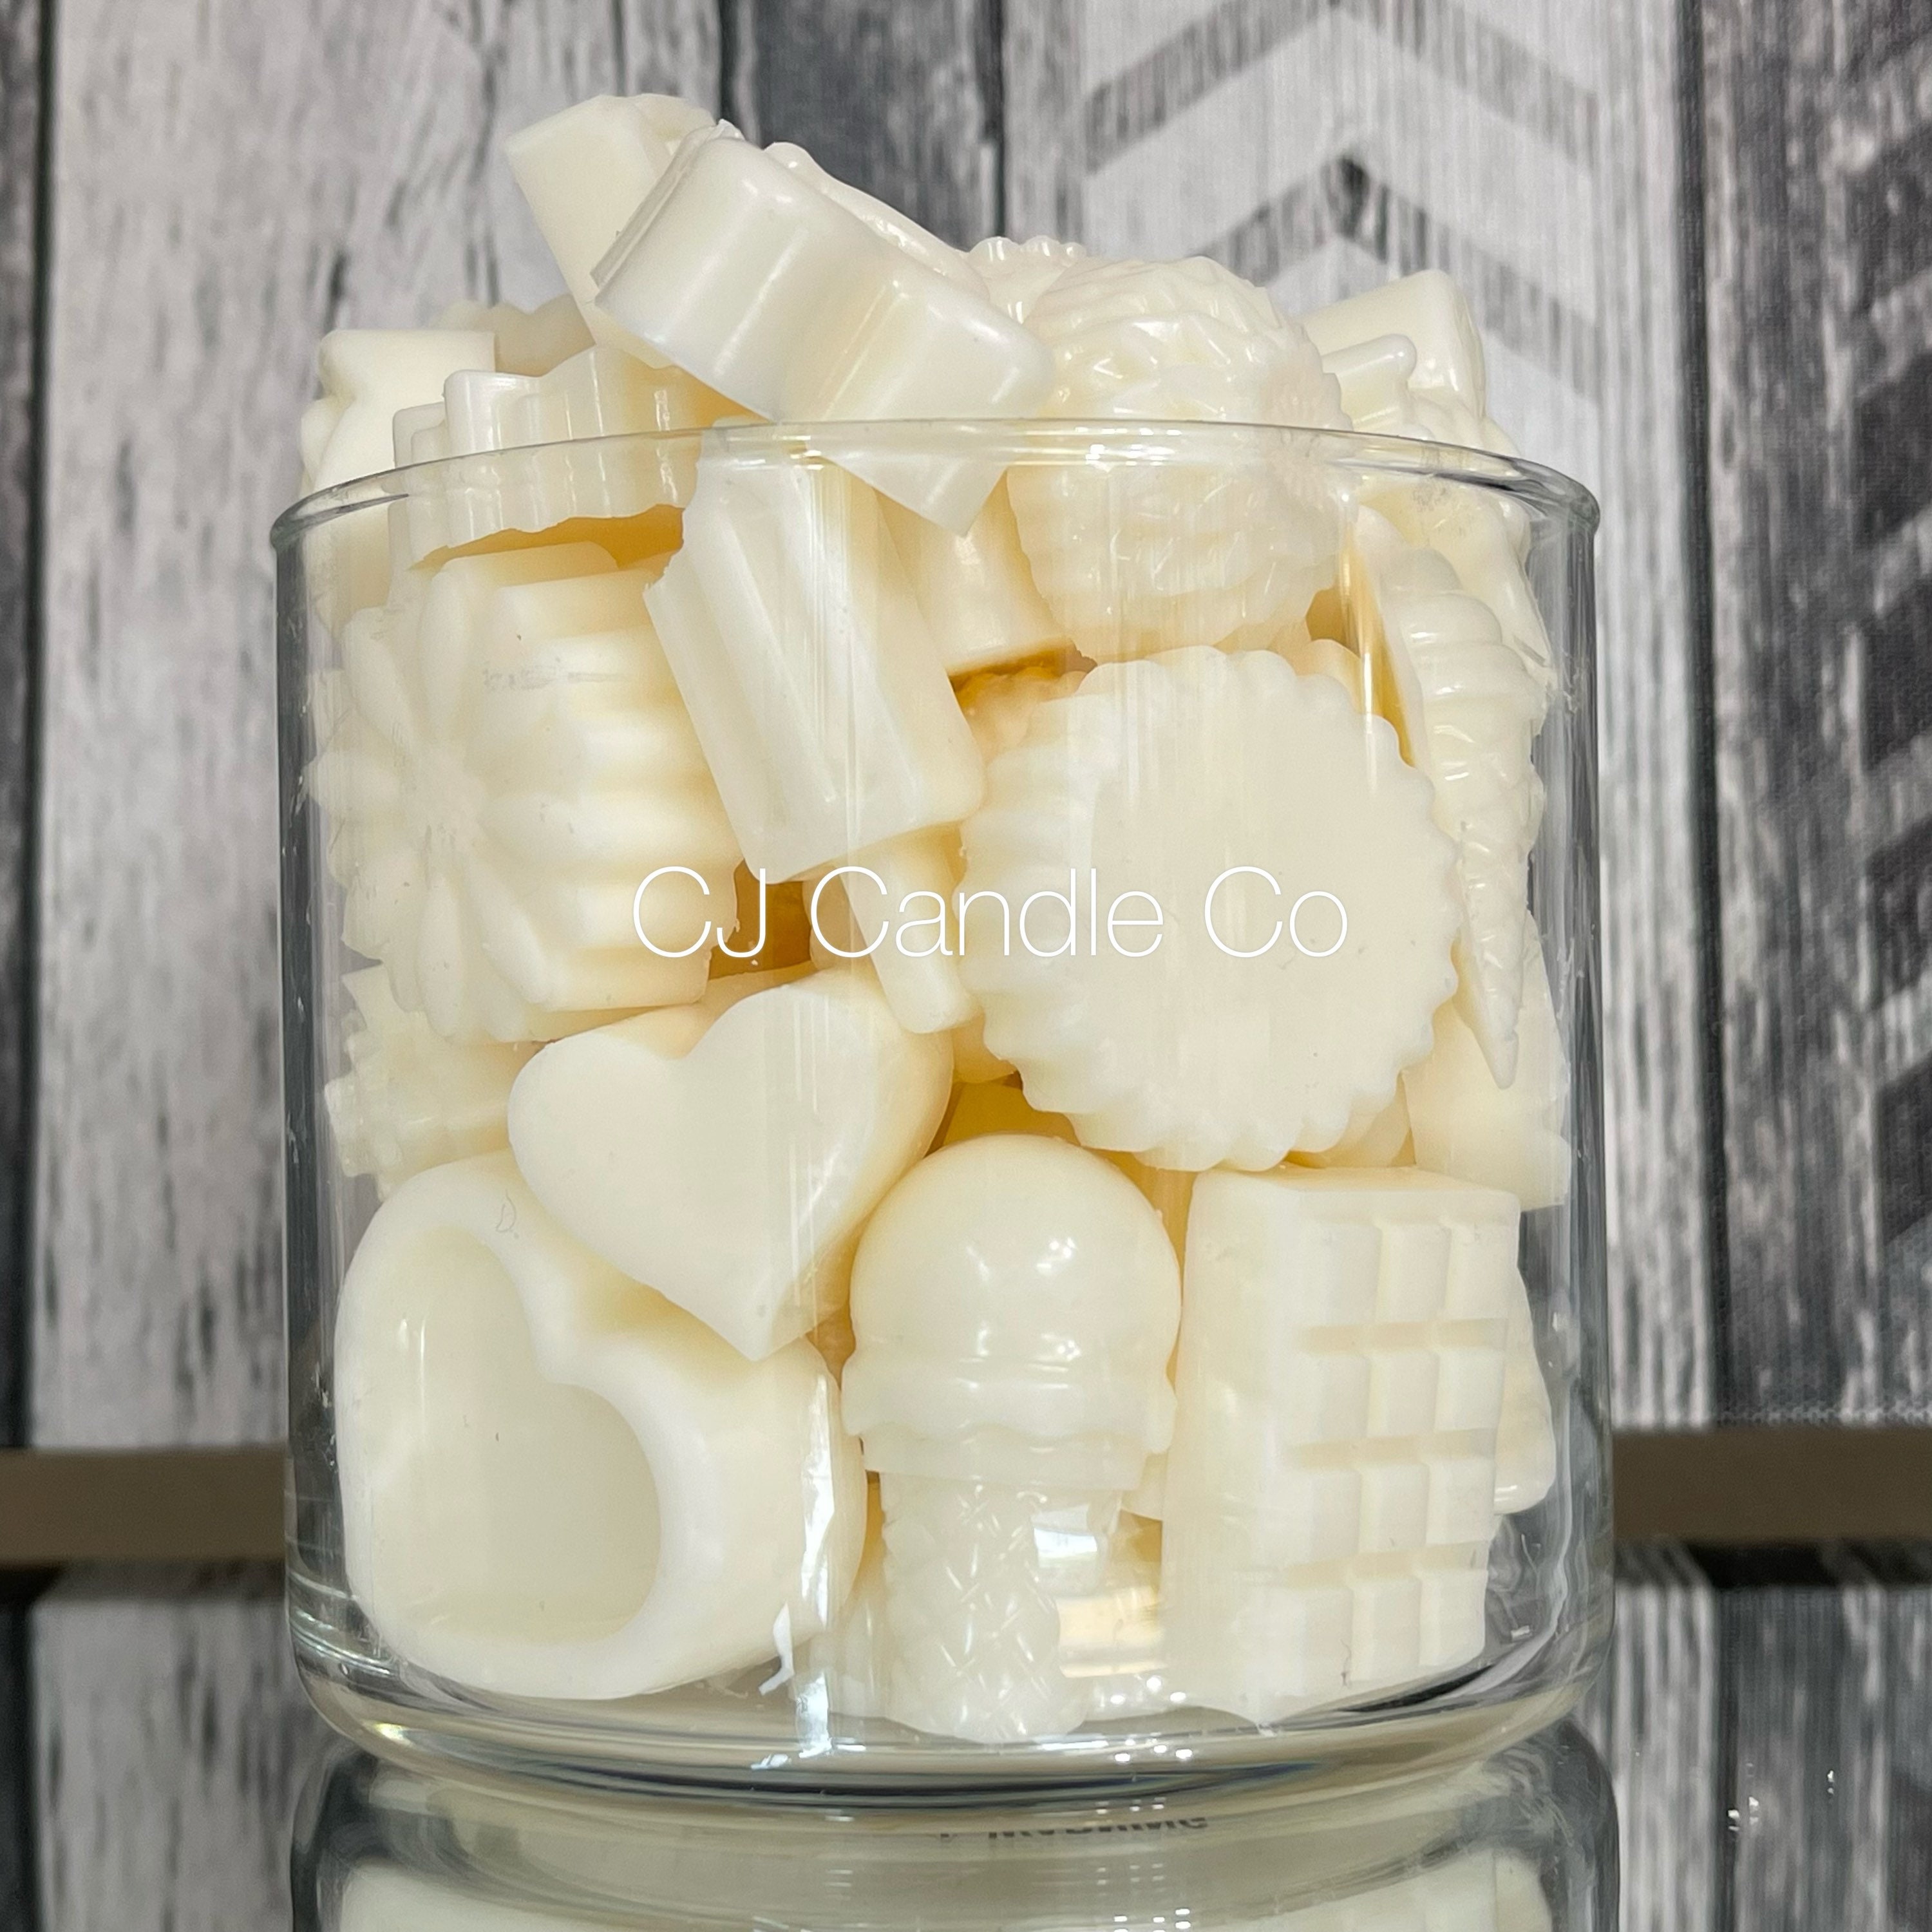 Eucalyptus Scented Wax Melt – Girlfriends' Candle Co.